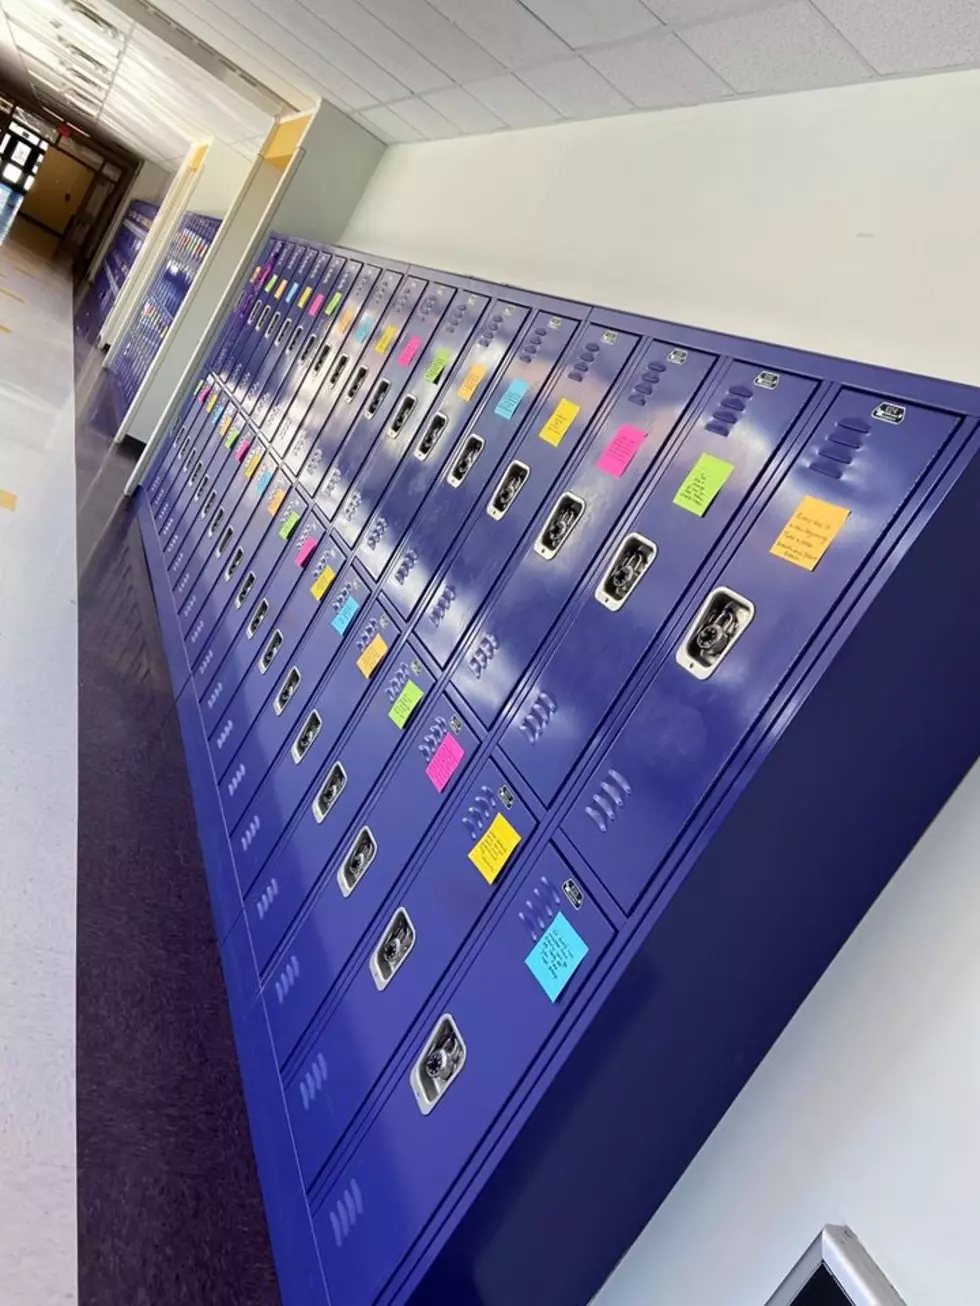 1000&#8217;s of Inspirational Notes Appear On Local HS Lockers